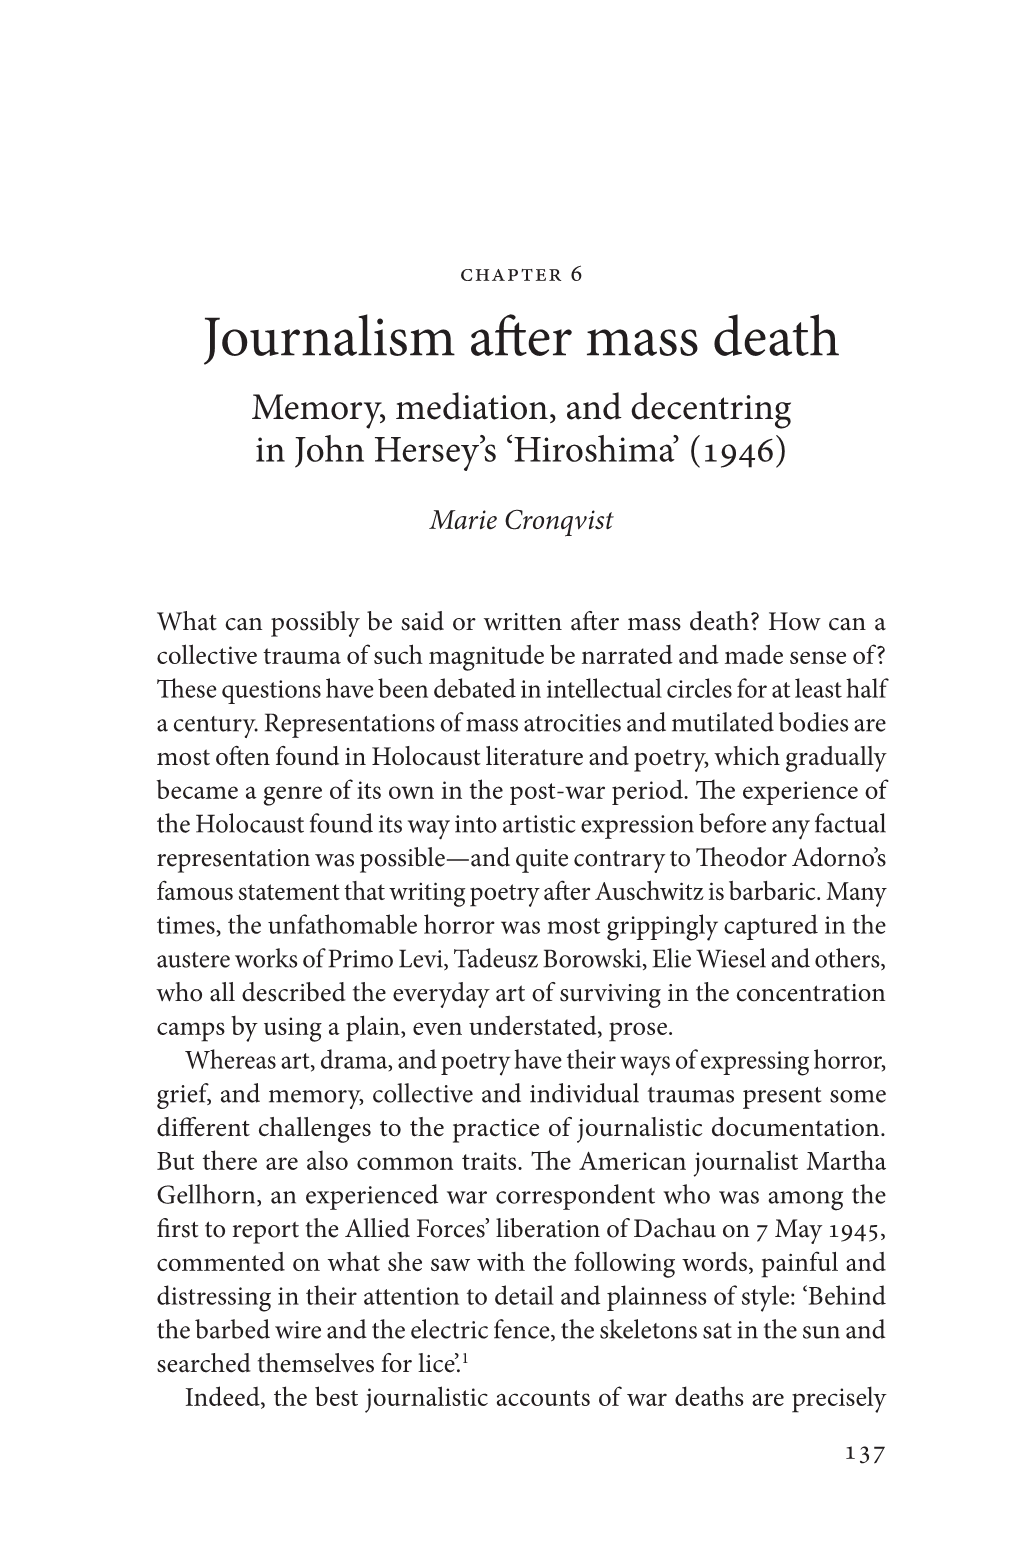 Journalism After Mass Death Memory, Mediation, and Decentring in John Hersey’S ‘Hiroshima’ (1946)